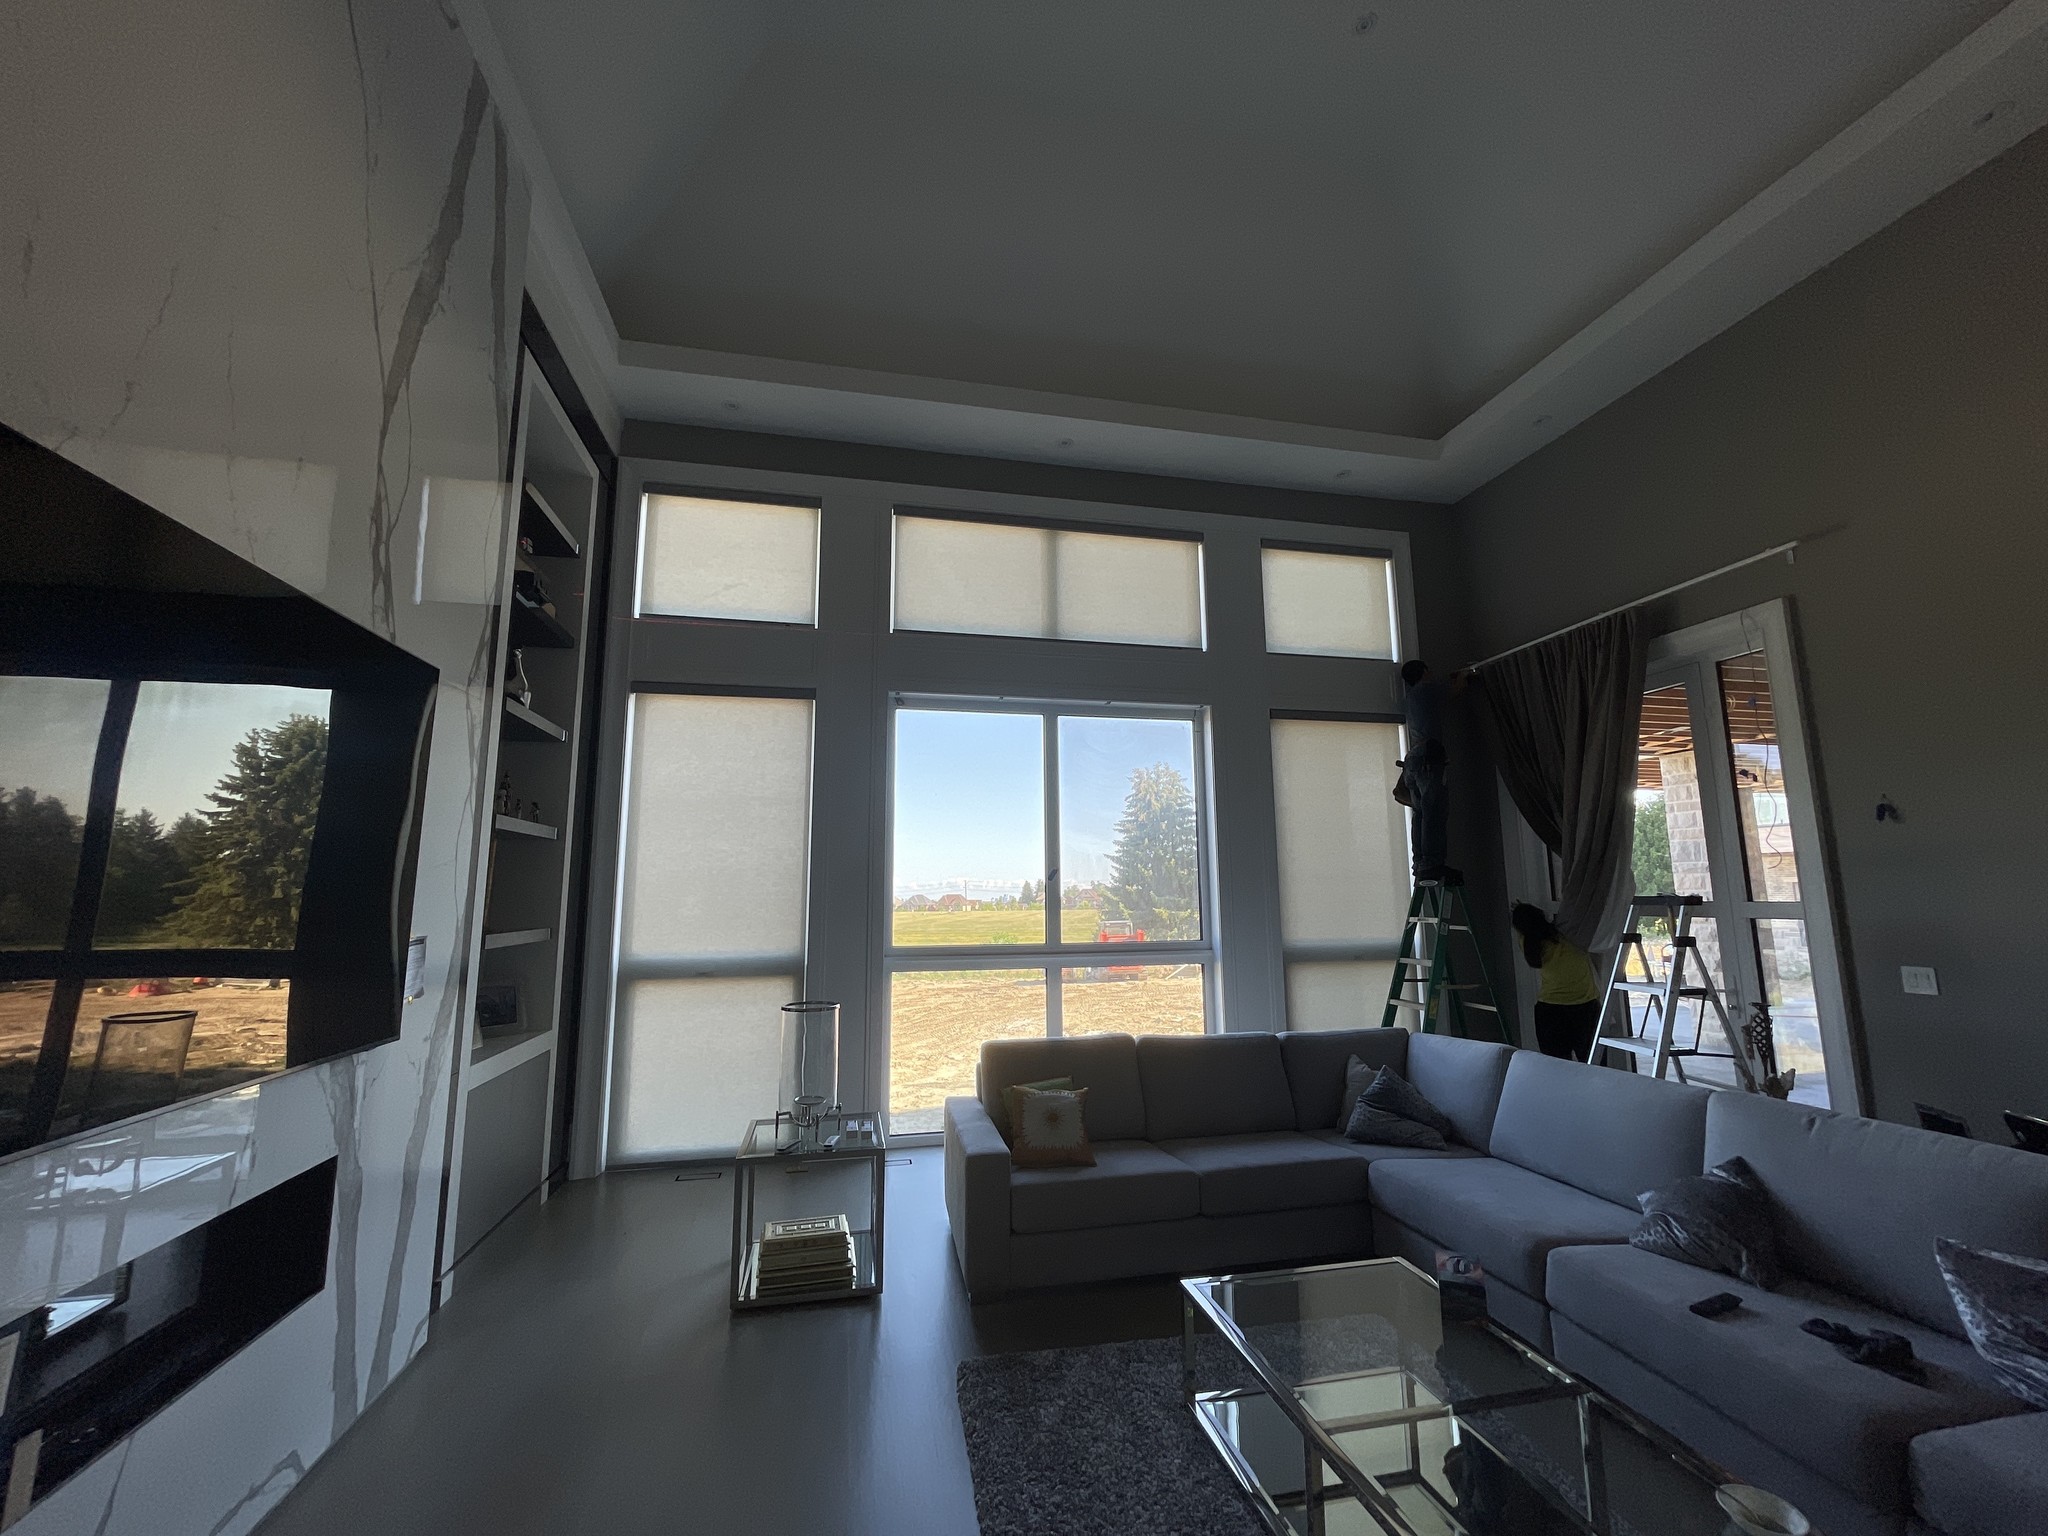 Installation of High Window Shades and Drapes